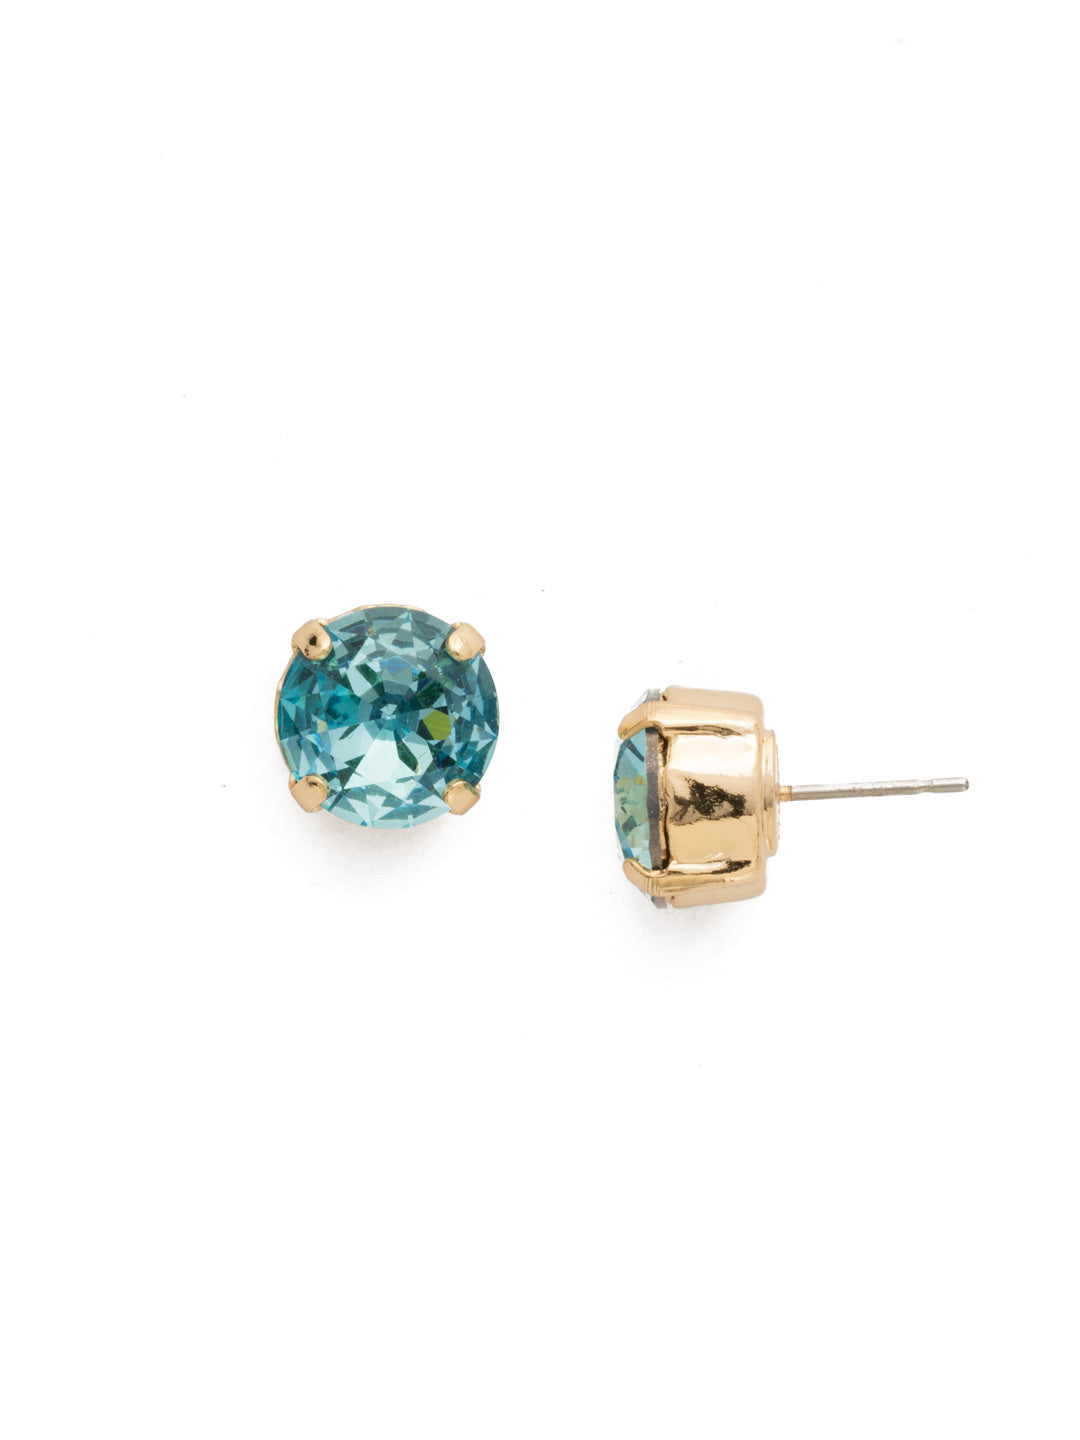 London Stud Earrings - ECM14BGAQU - <p>Everyone needs a great pair of studs. Add some classic sparkle to any occasion with these stud earrings. Need help picking a stud? <a href="https://www.sorrelli.com/blogs/sisterhood/round-stud-earrings-101-a-rundown-of-sizes-styles-and-sparkle">Check out our size guide!</a> From Sorrelli's Aquamarine collection in our Bright Gold-tone finish.</p>